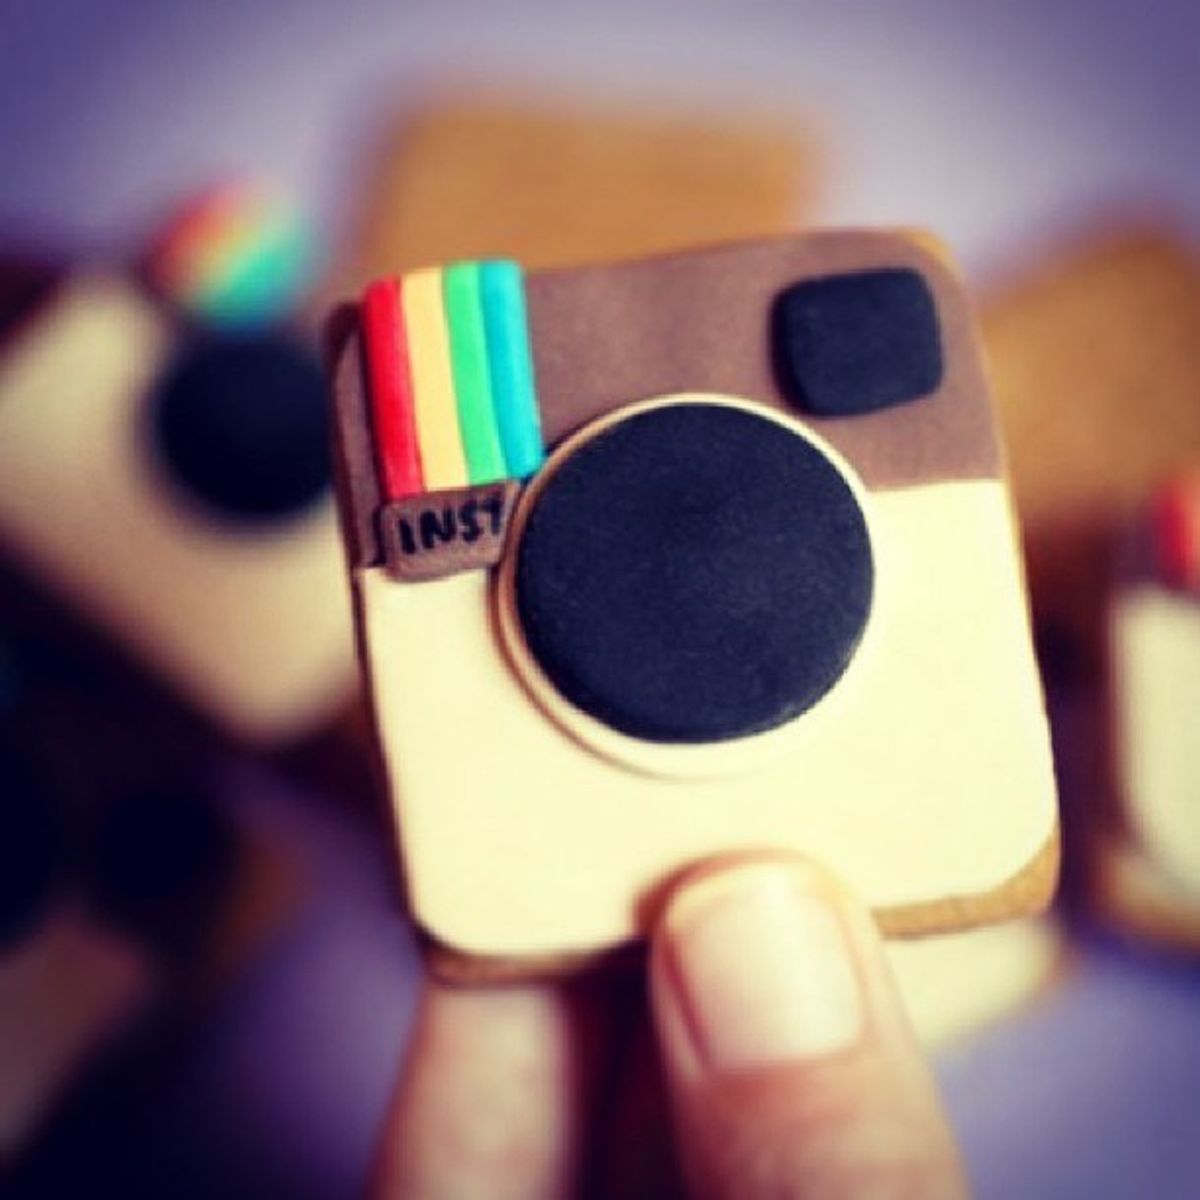 Are You Living Virtually On Instagram?